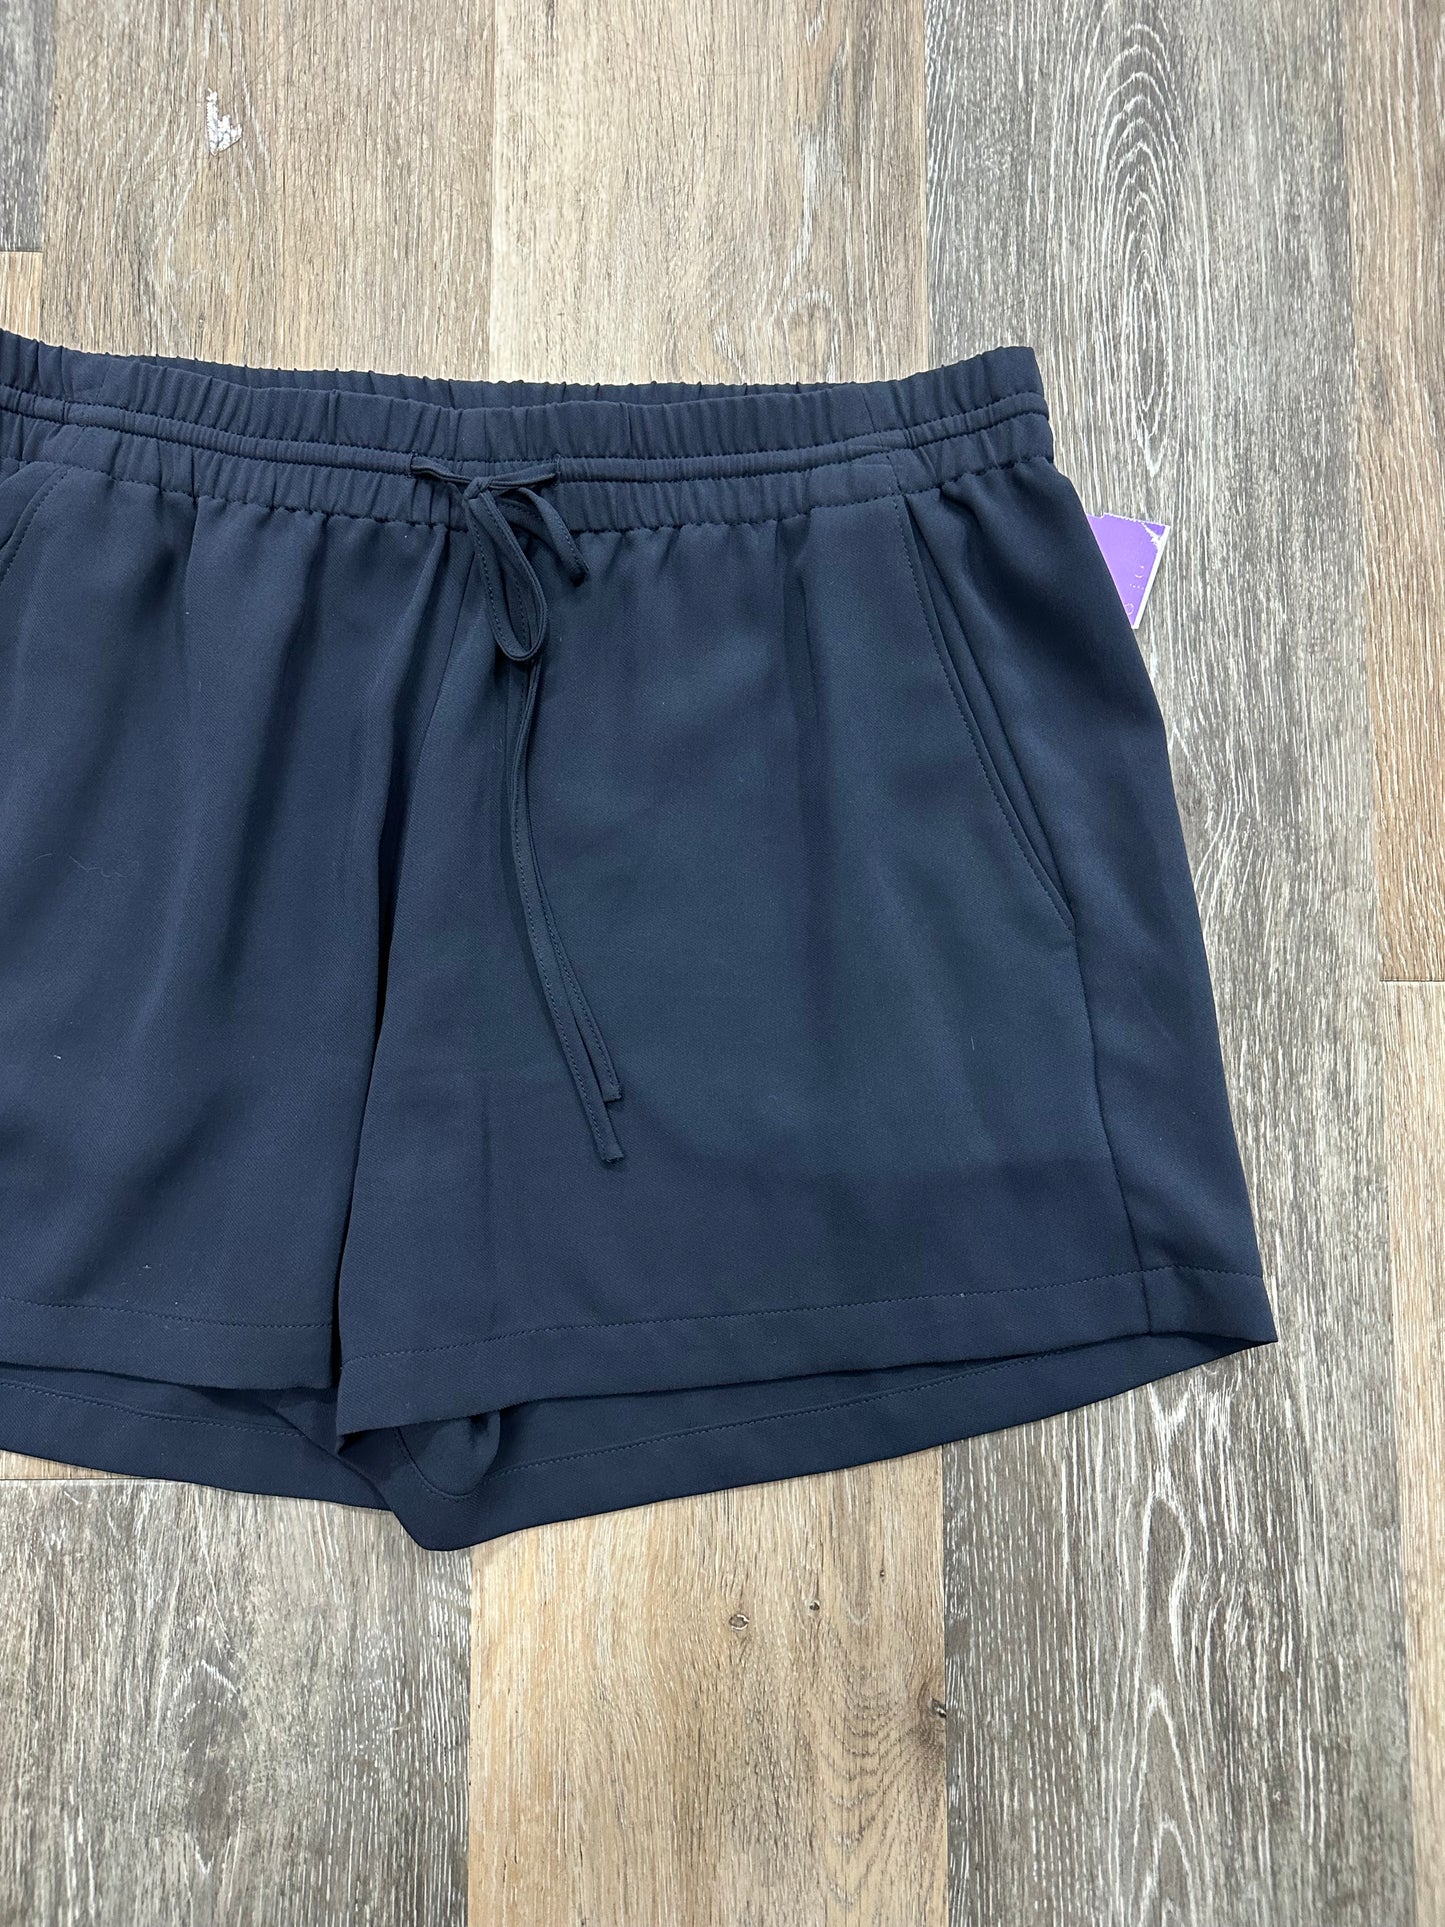 Shorts By Theory  Size: S